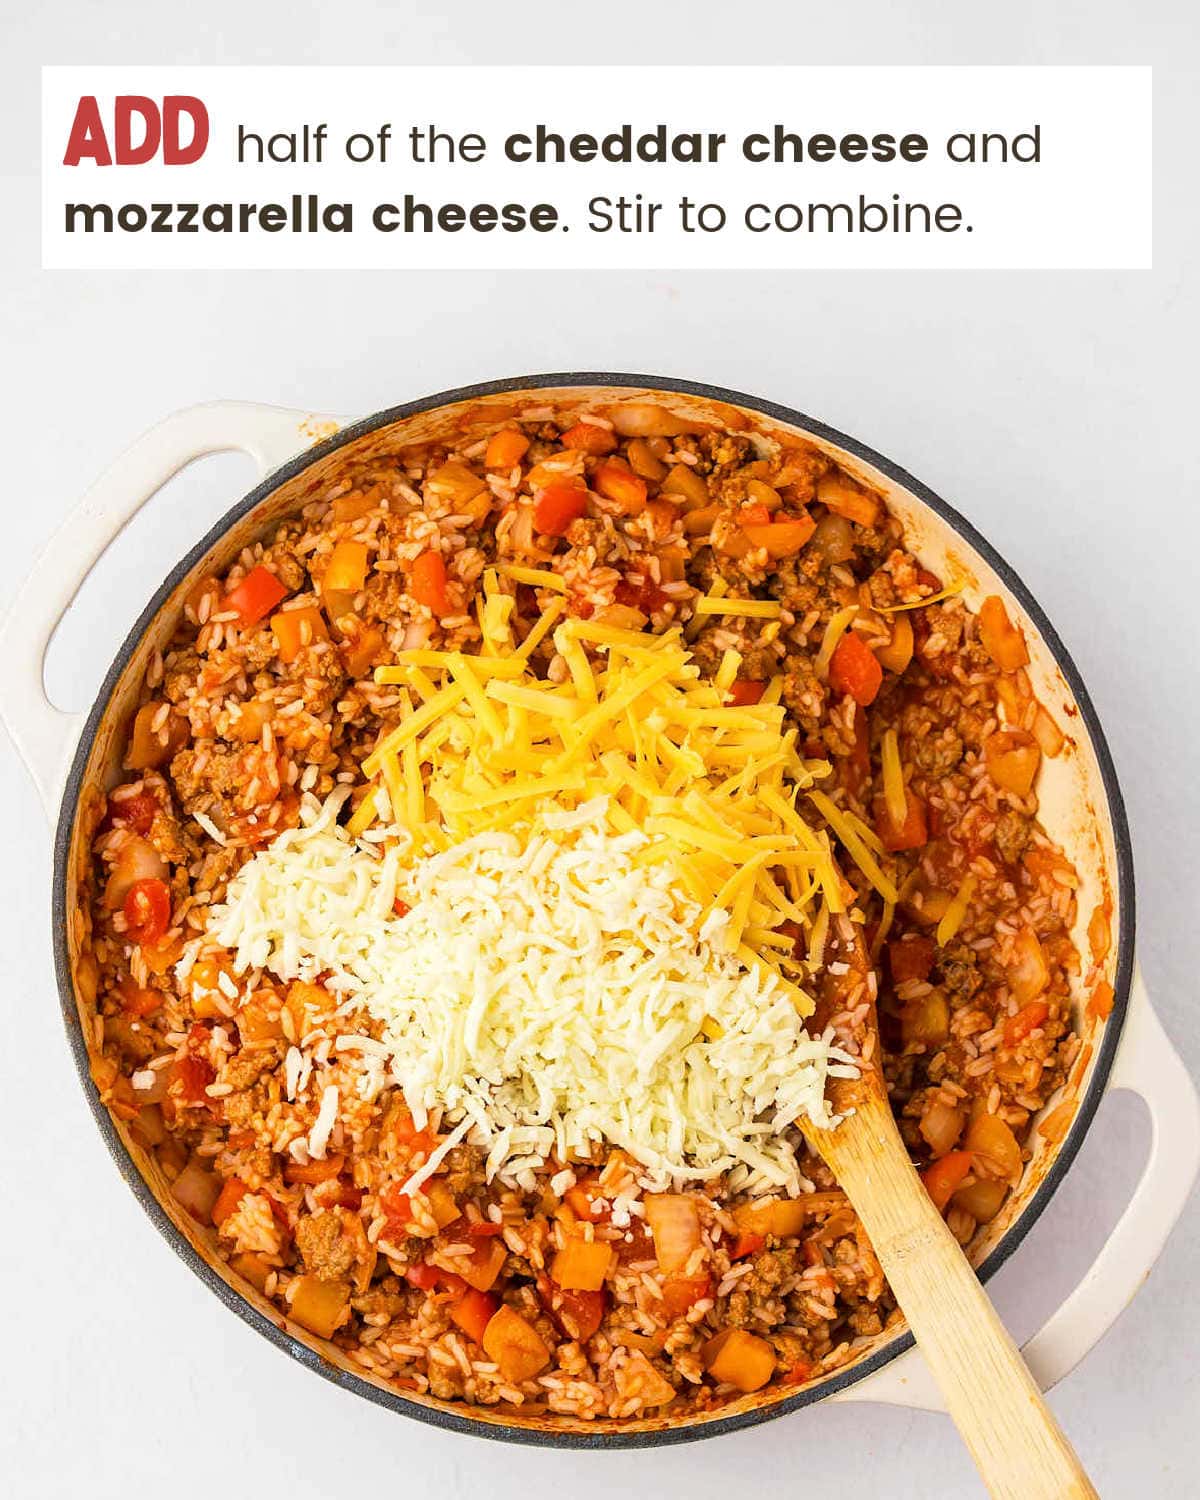 Add half the cheddar cheese and mozzerella cheese for Stuffed Pepper Casserole